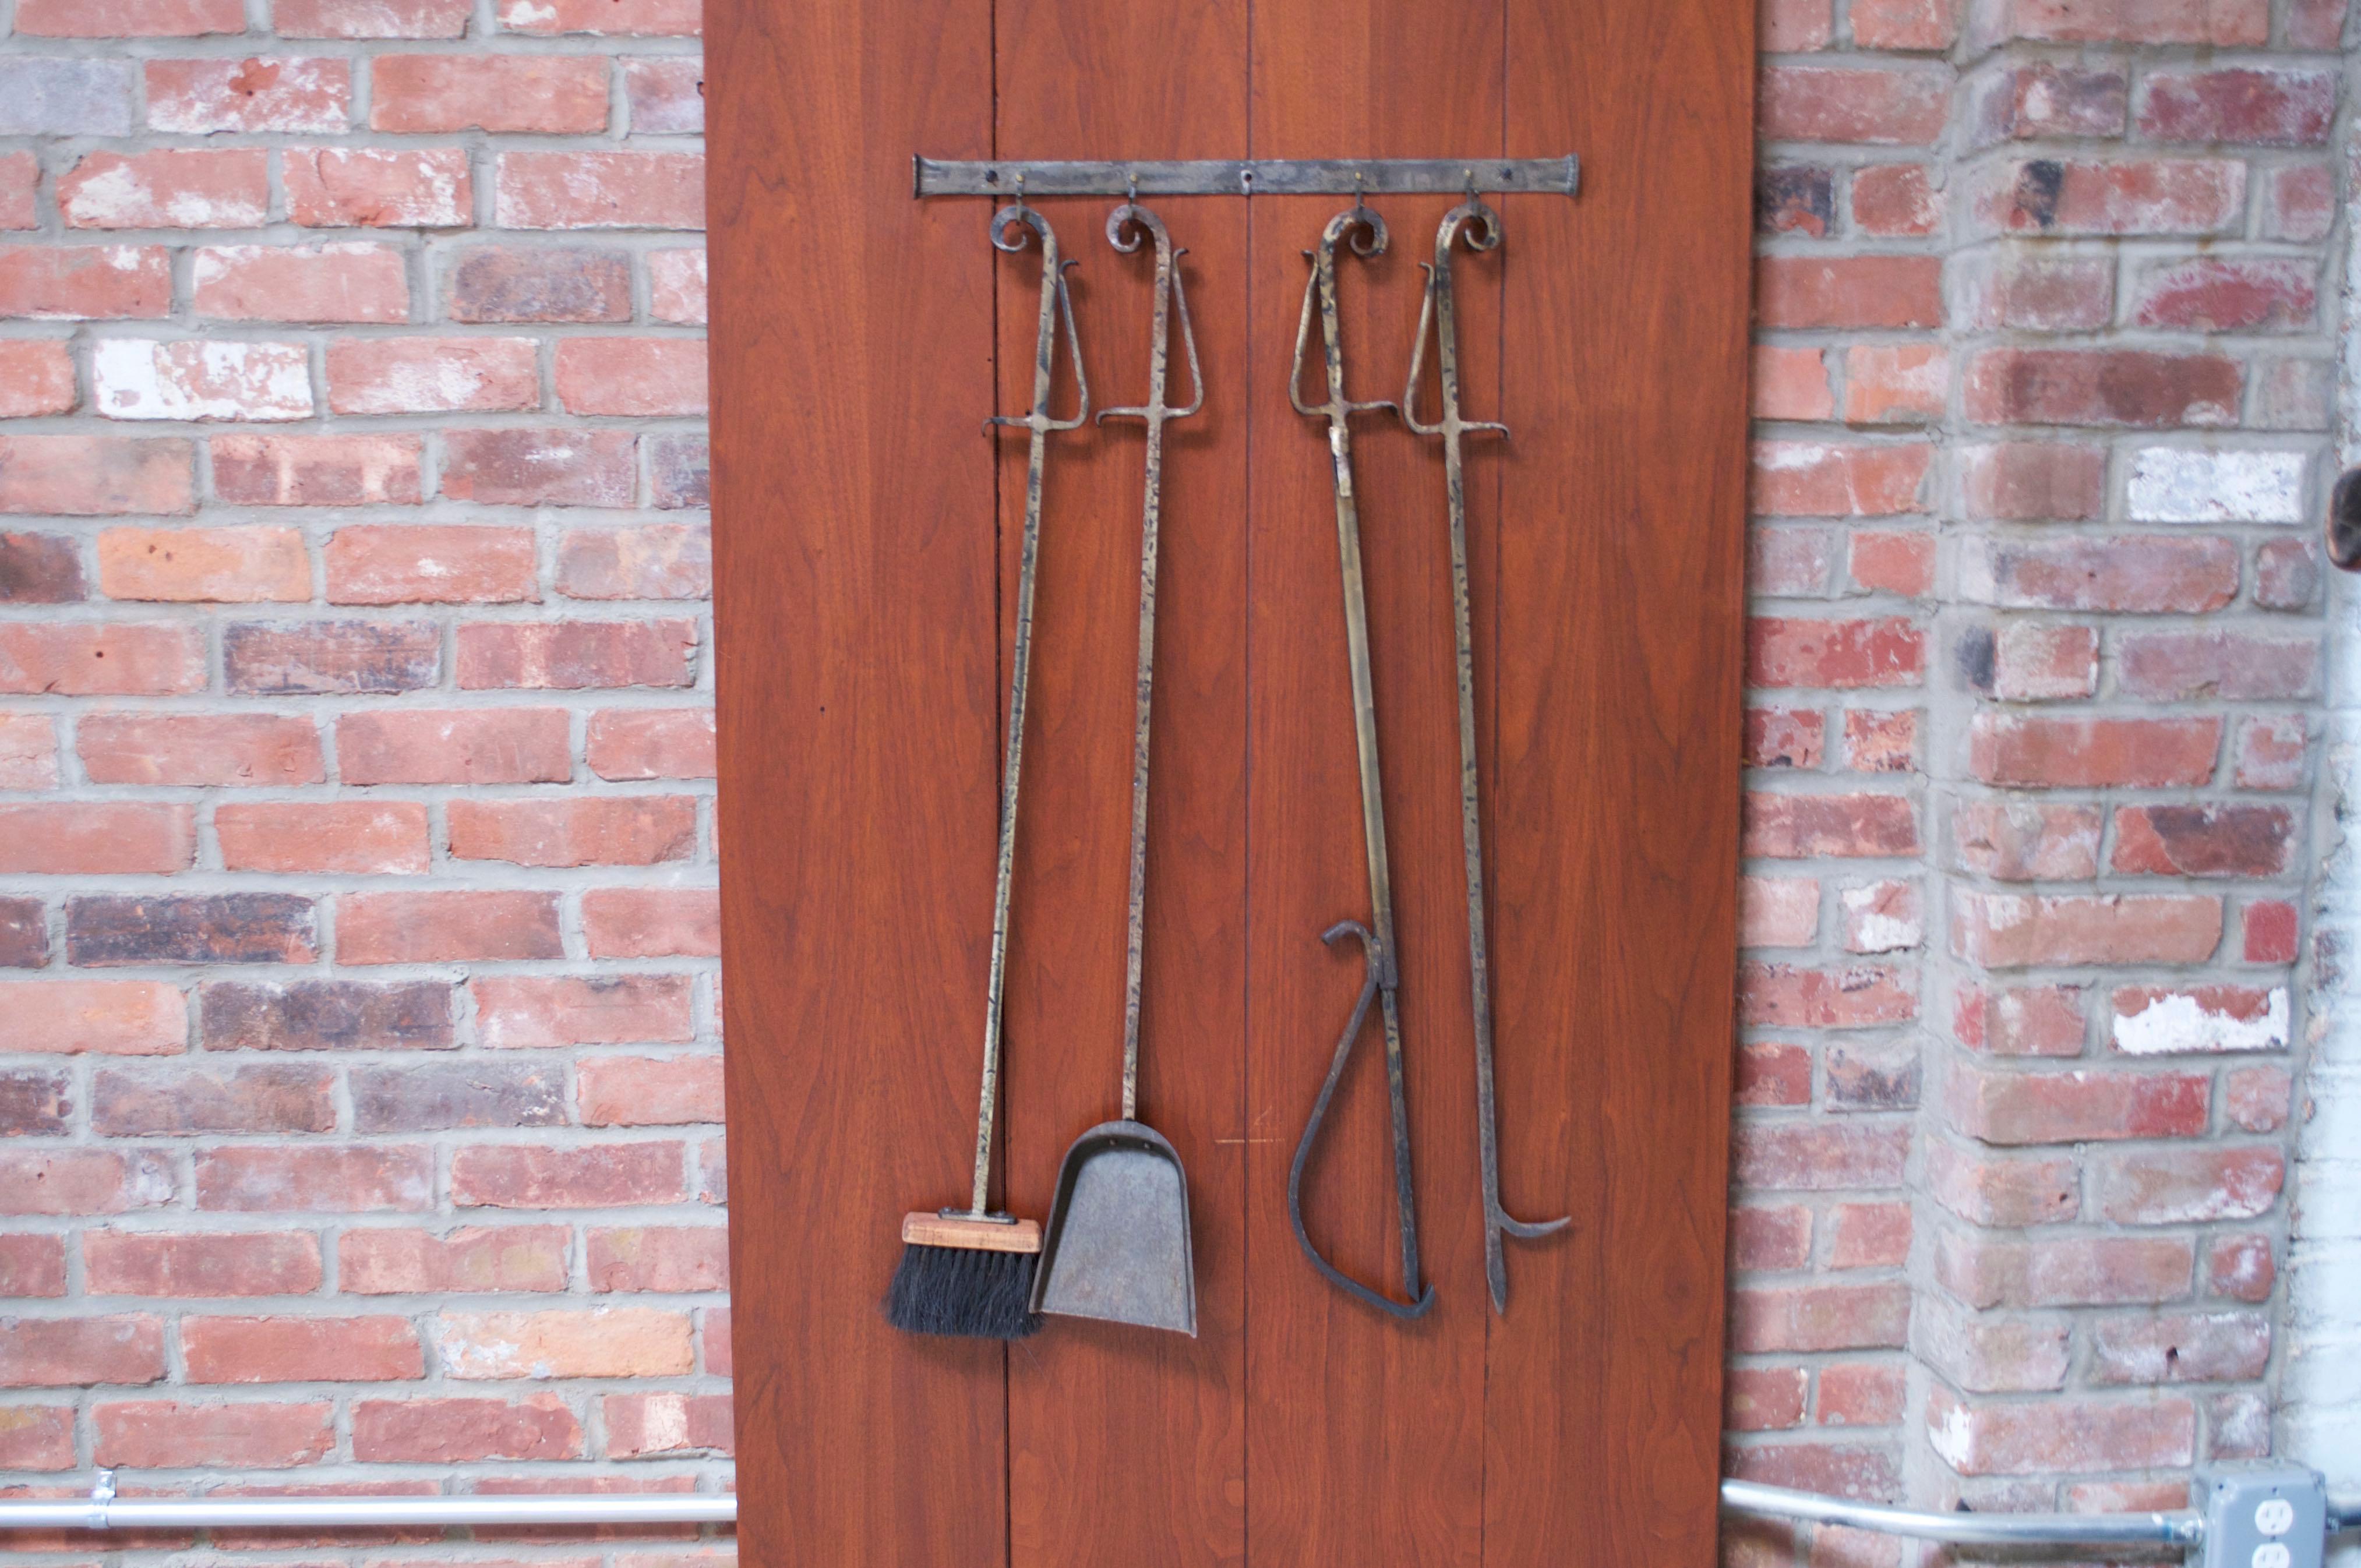 Circa 1970s / 1980s fire tool set including poker, log holder, brush, and shovel with wall-mounted holder. Nice texture with hammered detail to the forged iron with gilt finish. Paint loss in places / patina from age use. Remains in good, vintage